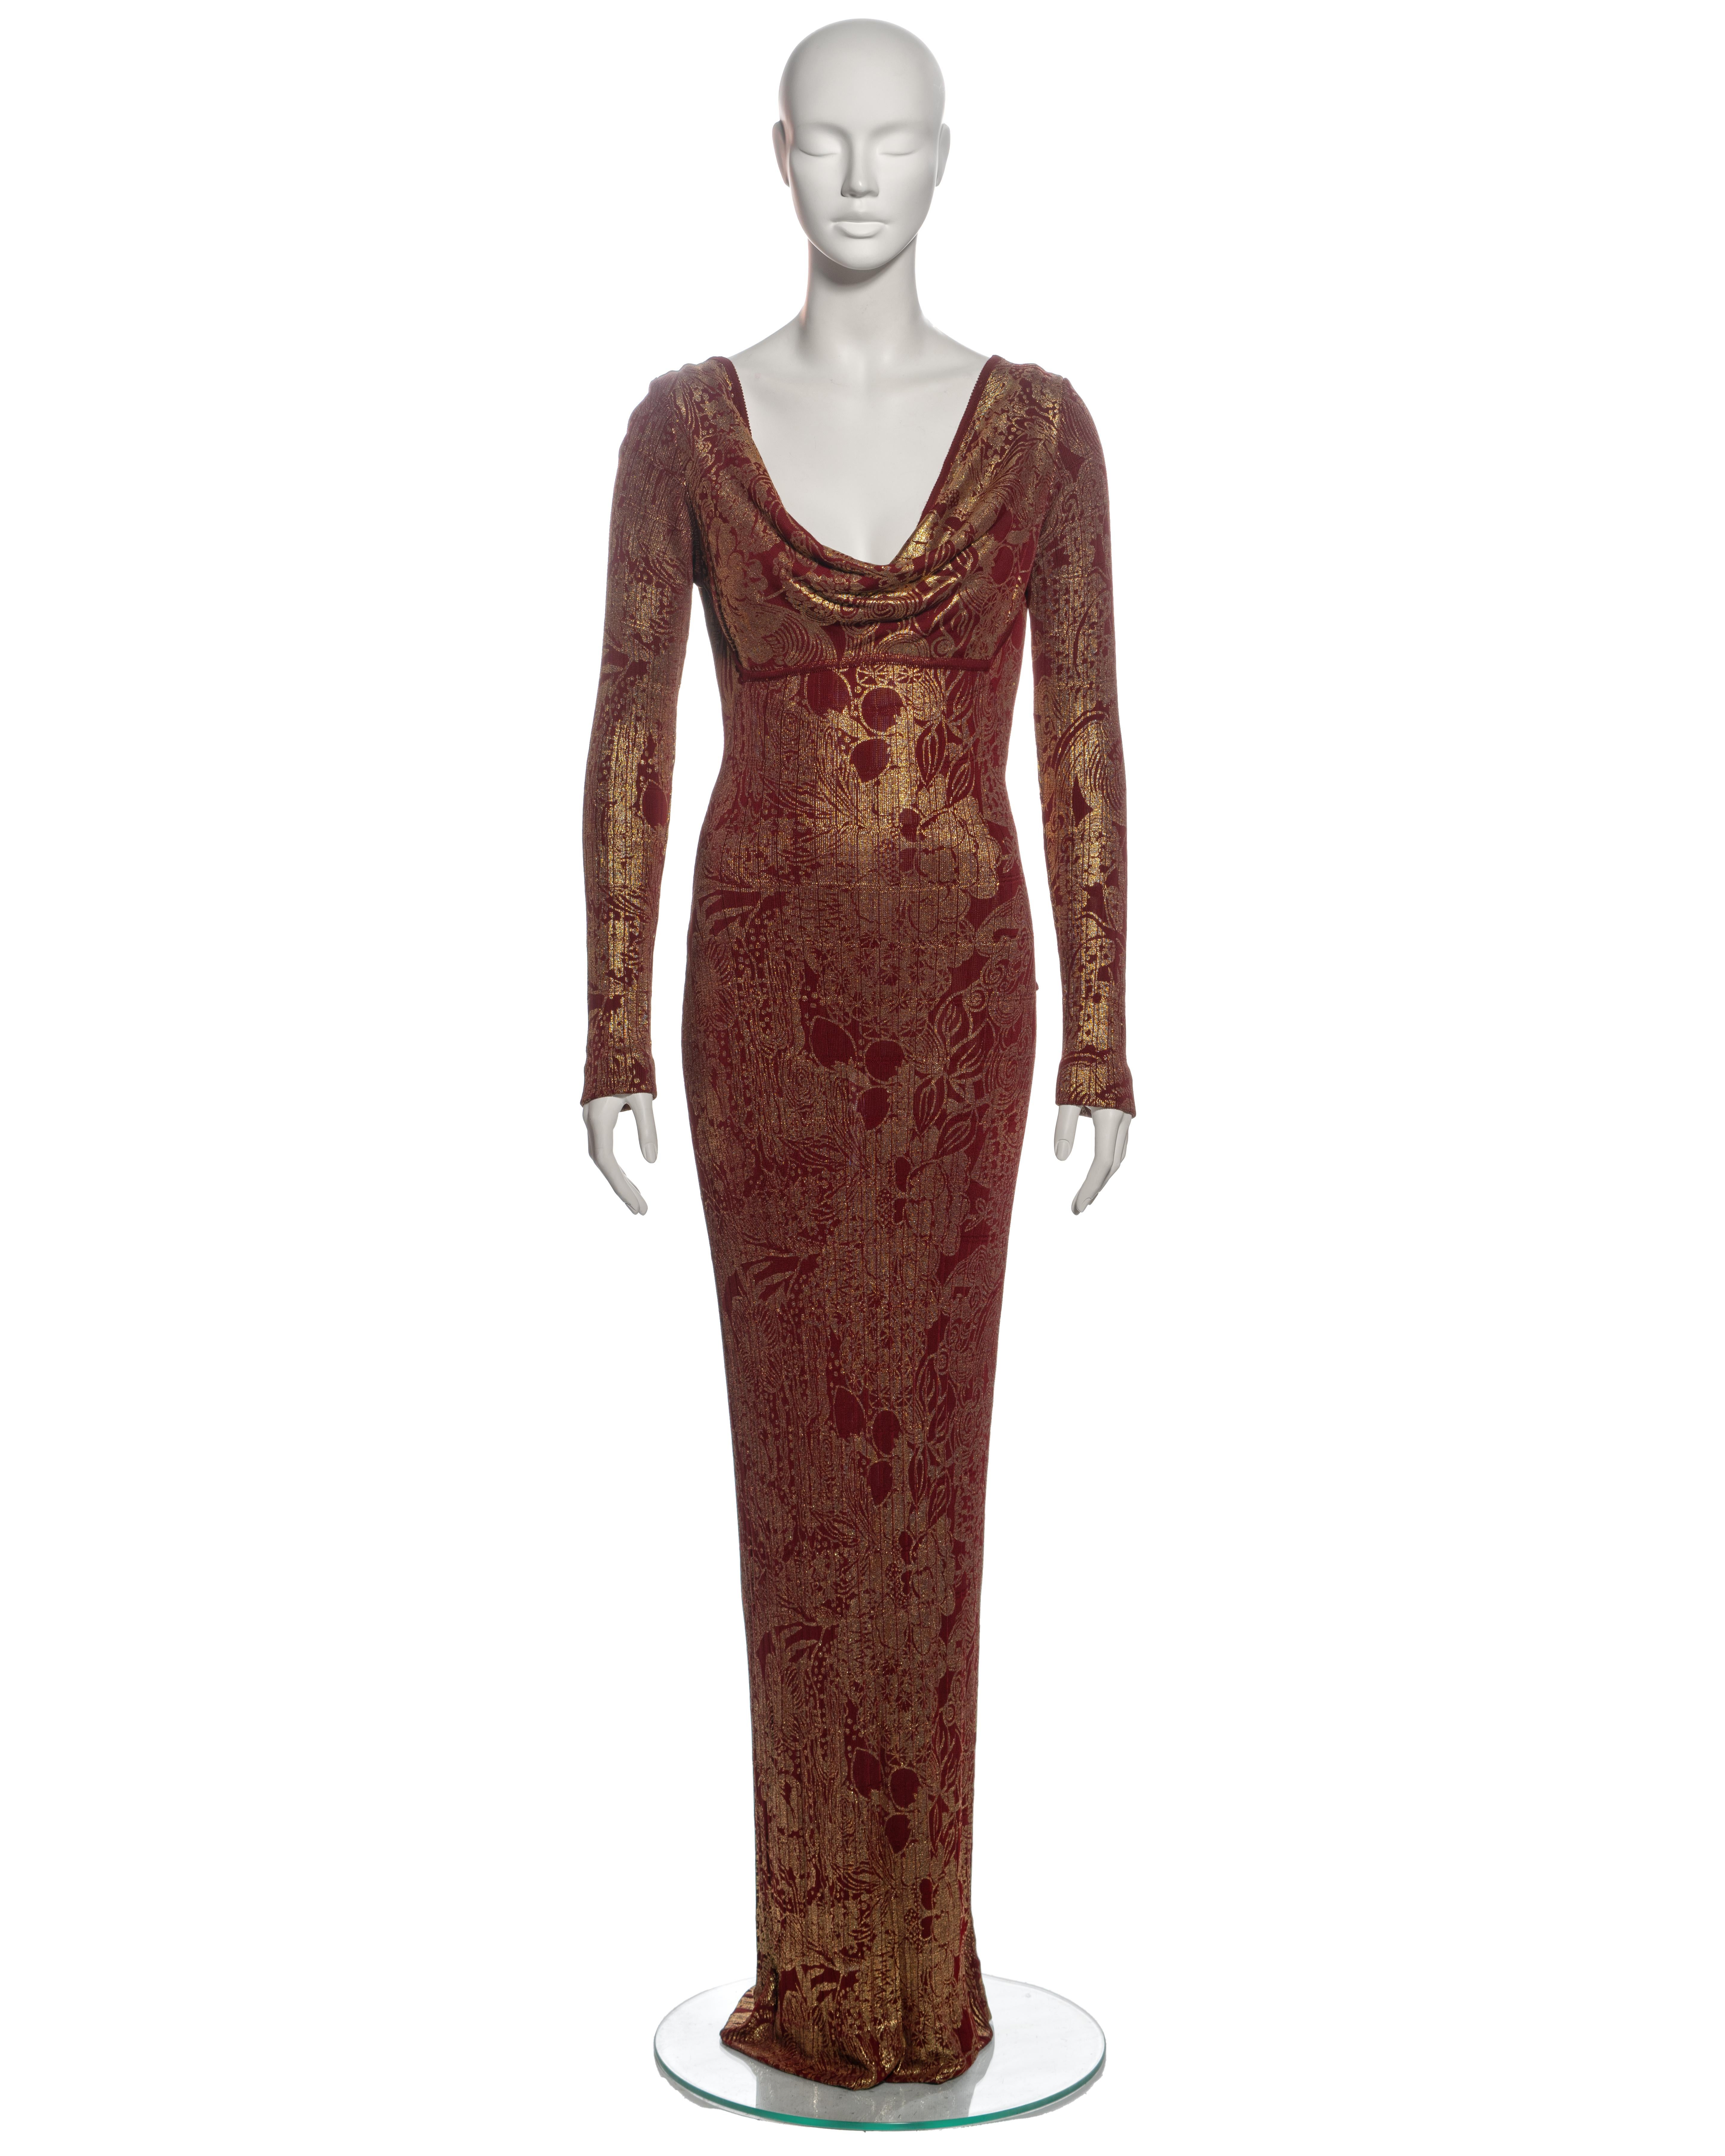 ▪ Archival John Galliano evening dress
▪ Fall-Winter 1998
▪ Bordeaux red viscose ribbed knit 
▪ Gold foil floral print 
▪ Draped cowl neckline
▪ Low back accentuated with draped cowls
▪ Long fitted sleeves
▪ Floor length skirt 
▪ Size Medium
▪ Made